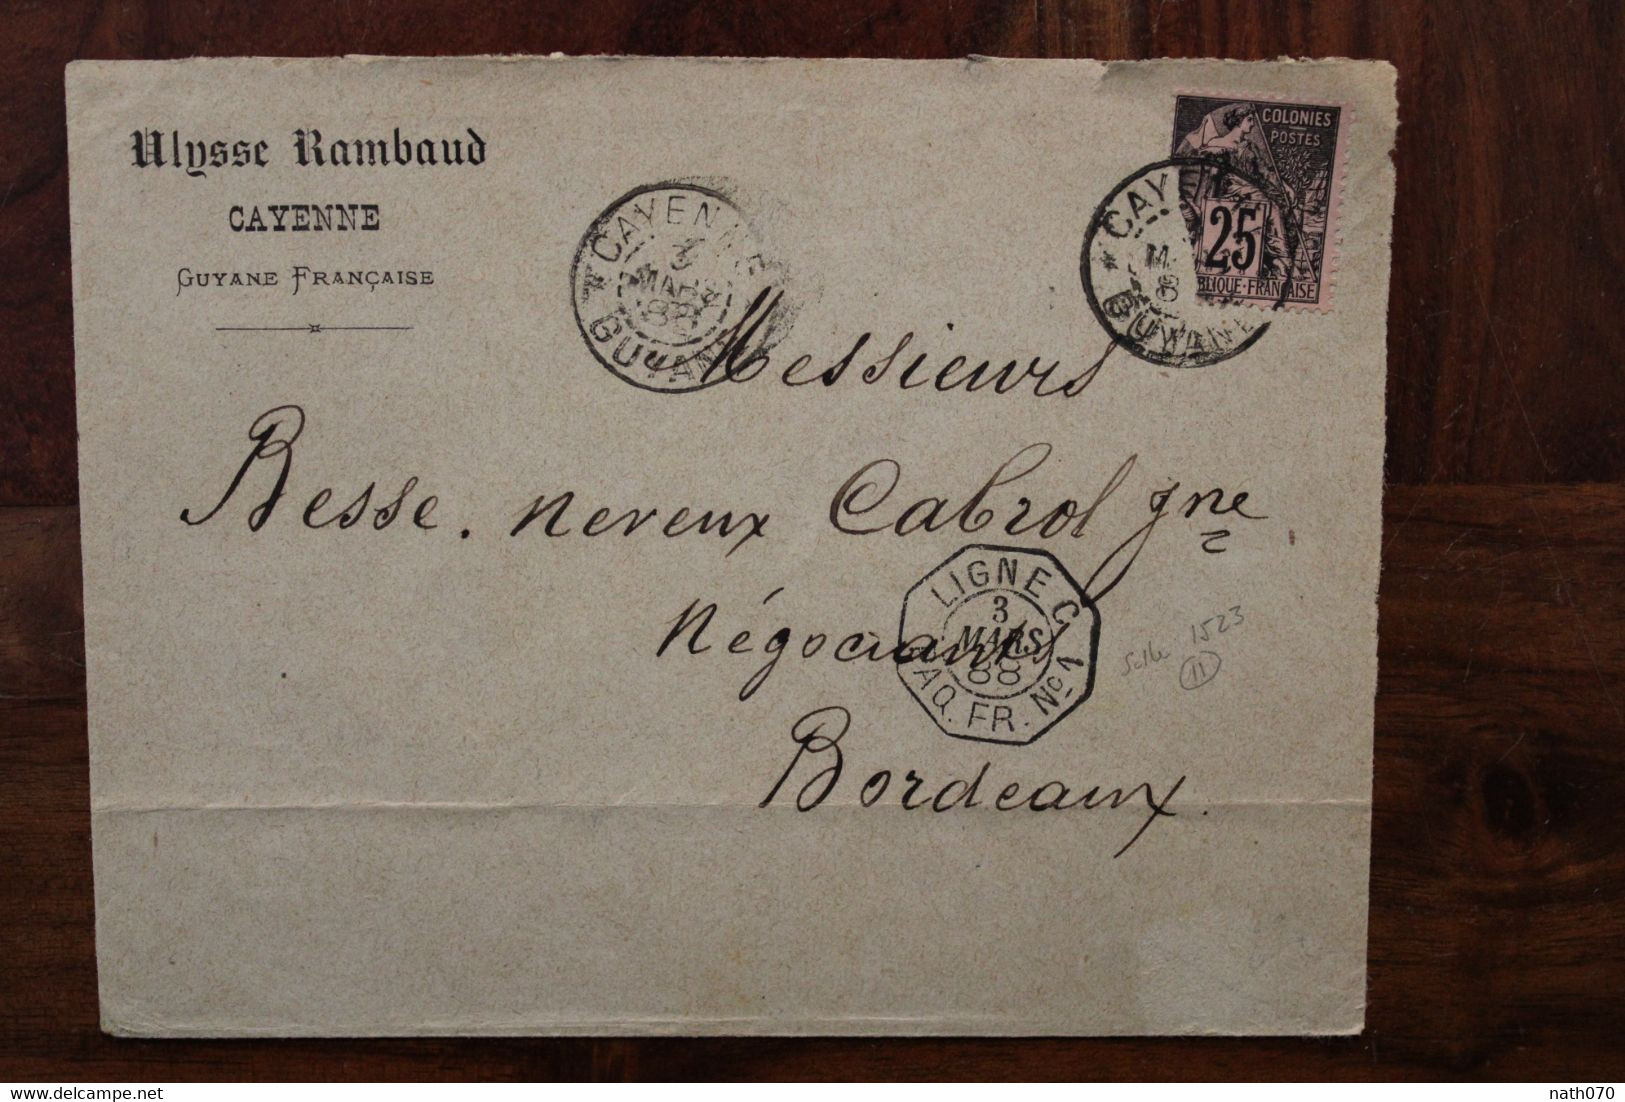 Cayenne Guyane Française 1888 France Cover French Guyana Colonie Cachet Maritime Ligne C Paq Fr N°1 Timbre Seul - Lettres & Documents